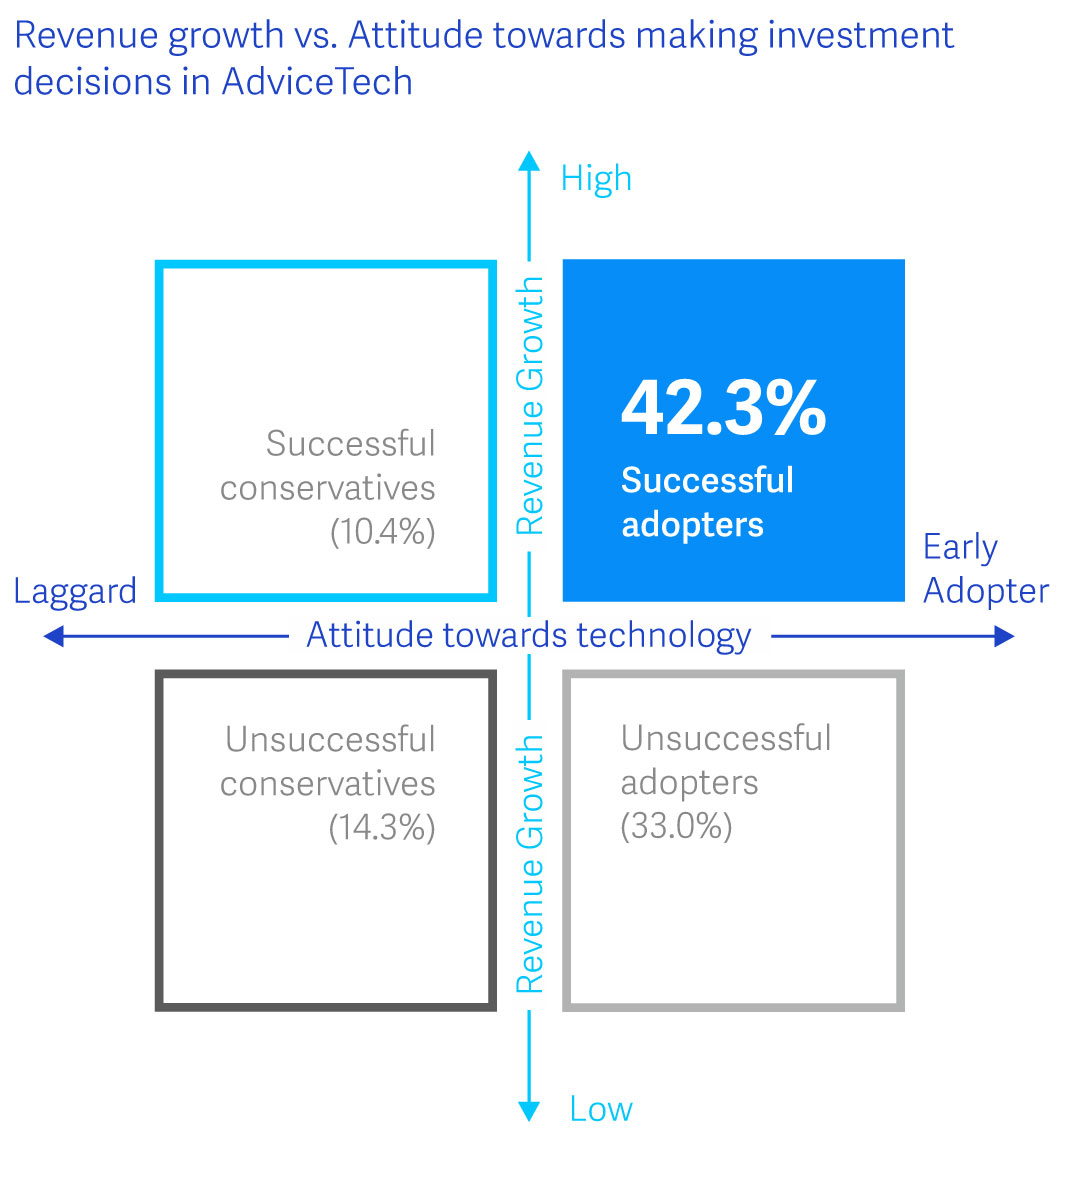 2019 Netwealth AdviceTech research report